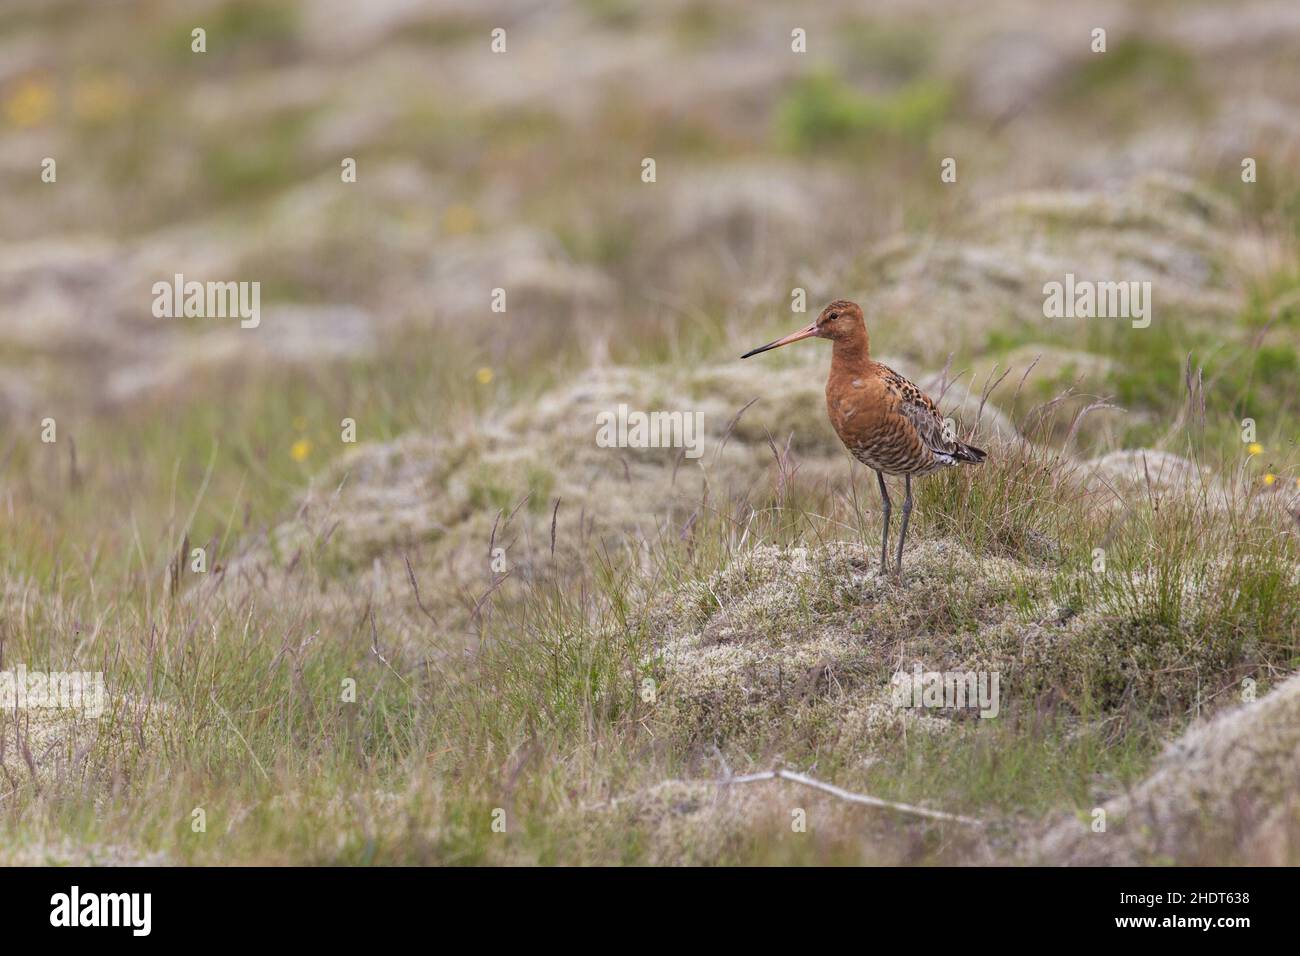 Black-tailed godwit, Limosa limosa, in the grass Stock Photo